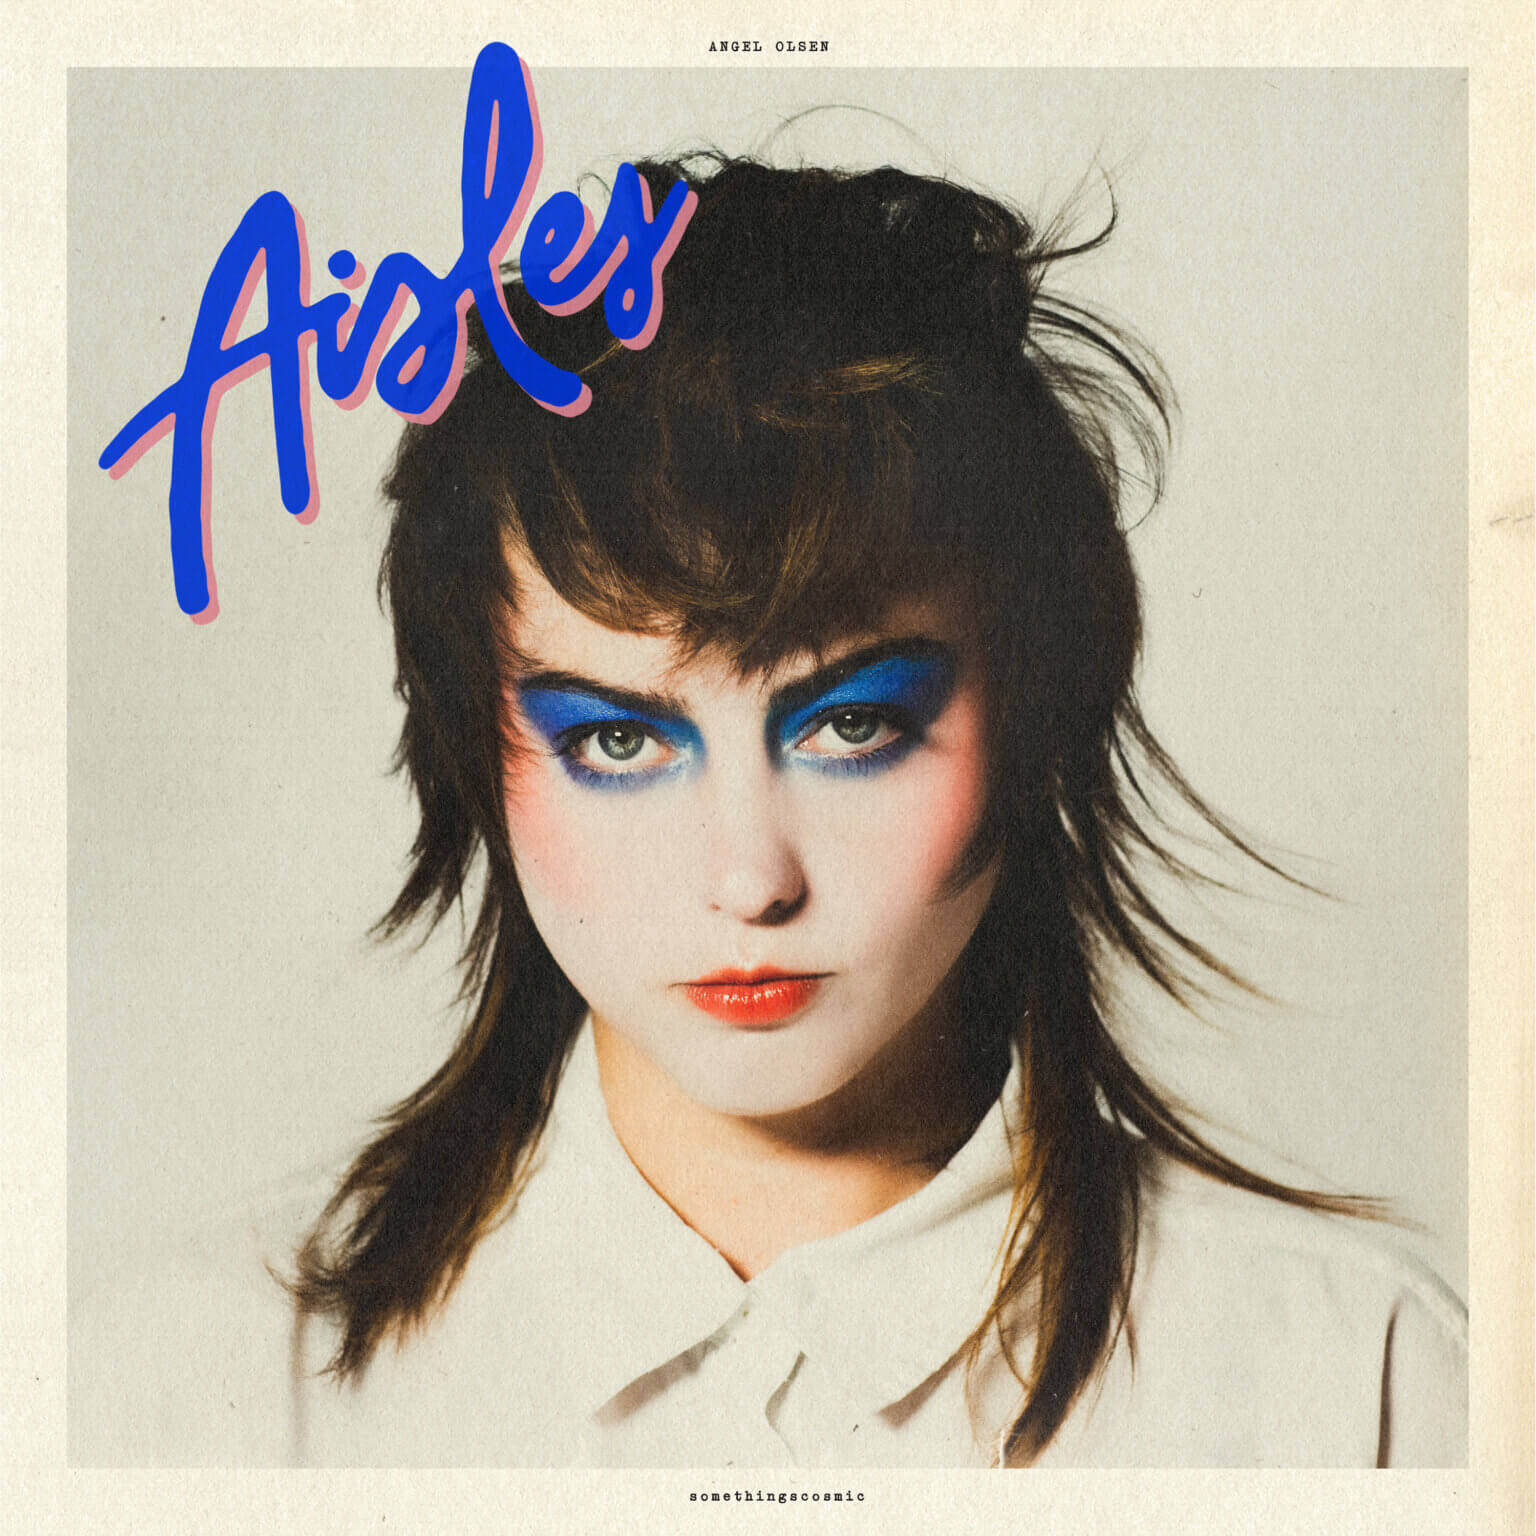 Angel Olsen announced her Aisles EP, including covers of “Gloria” (Laura Branigan), “Eyes Without A Face” (Billy Idol), “Safety Dance”